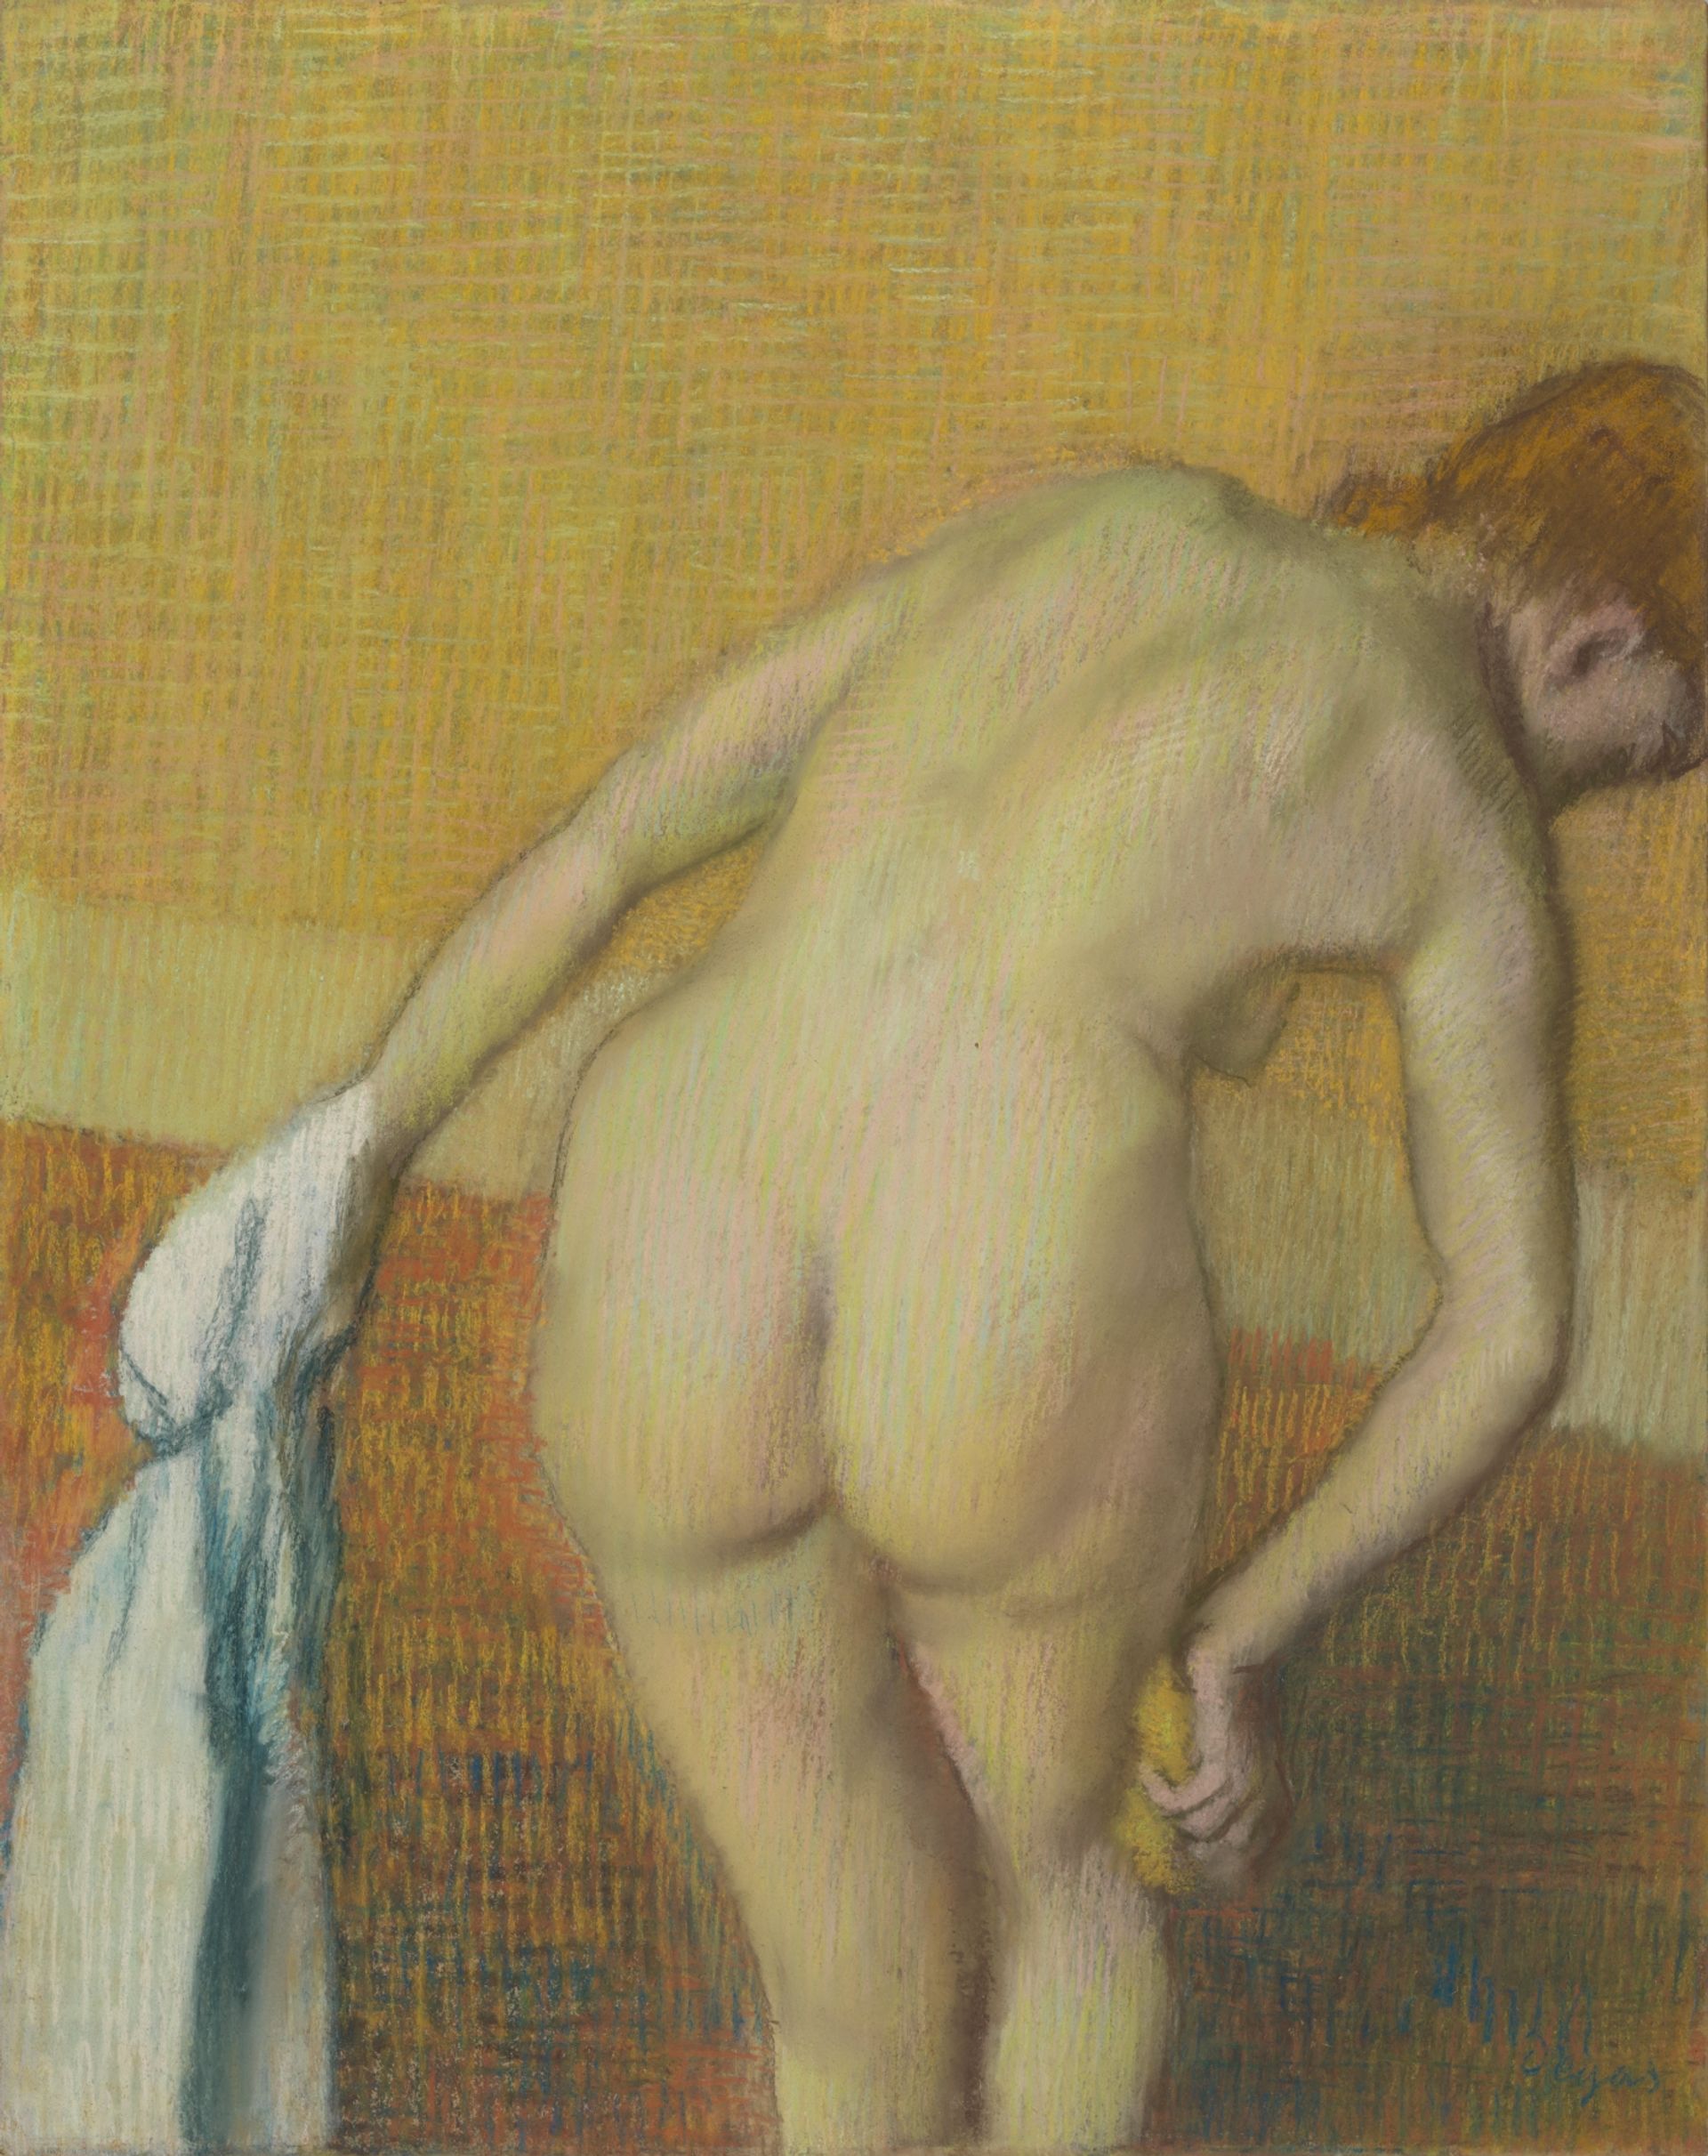 Edgar Degas’s Woman Bathing (around 1886) Courtesy of the Van Gogh Museum, Amsterdam (purchased with support from BankGiro Loterij, Mondrian Fund, Triton Collection Foundation and Members of The Yellow House)